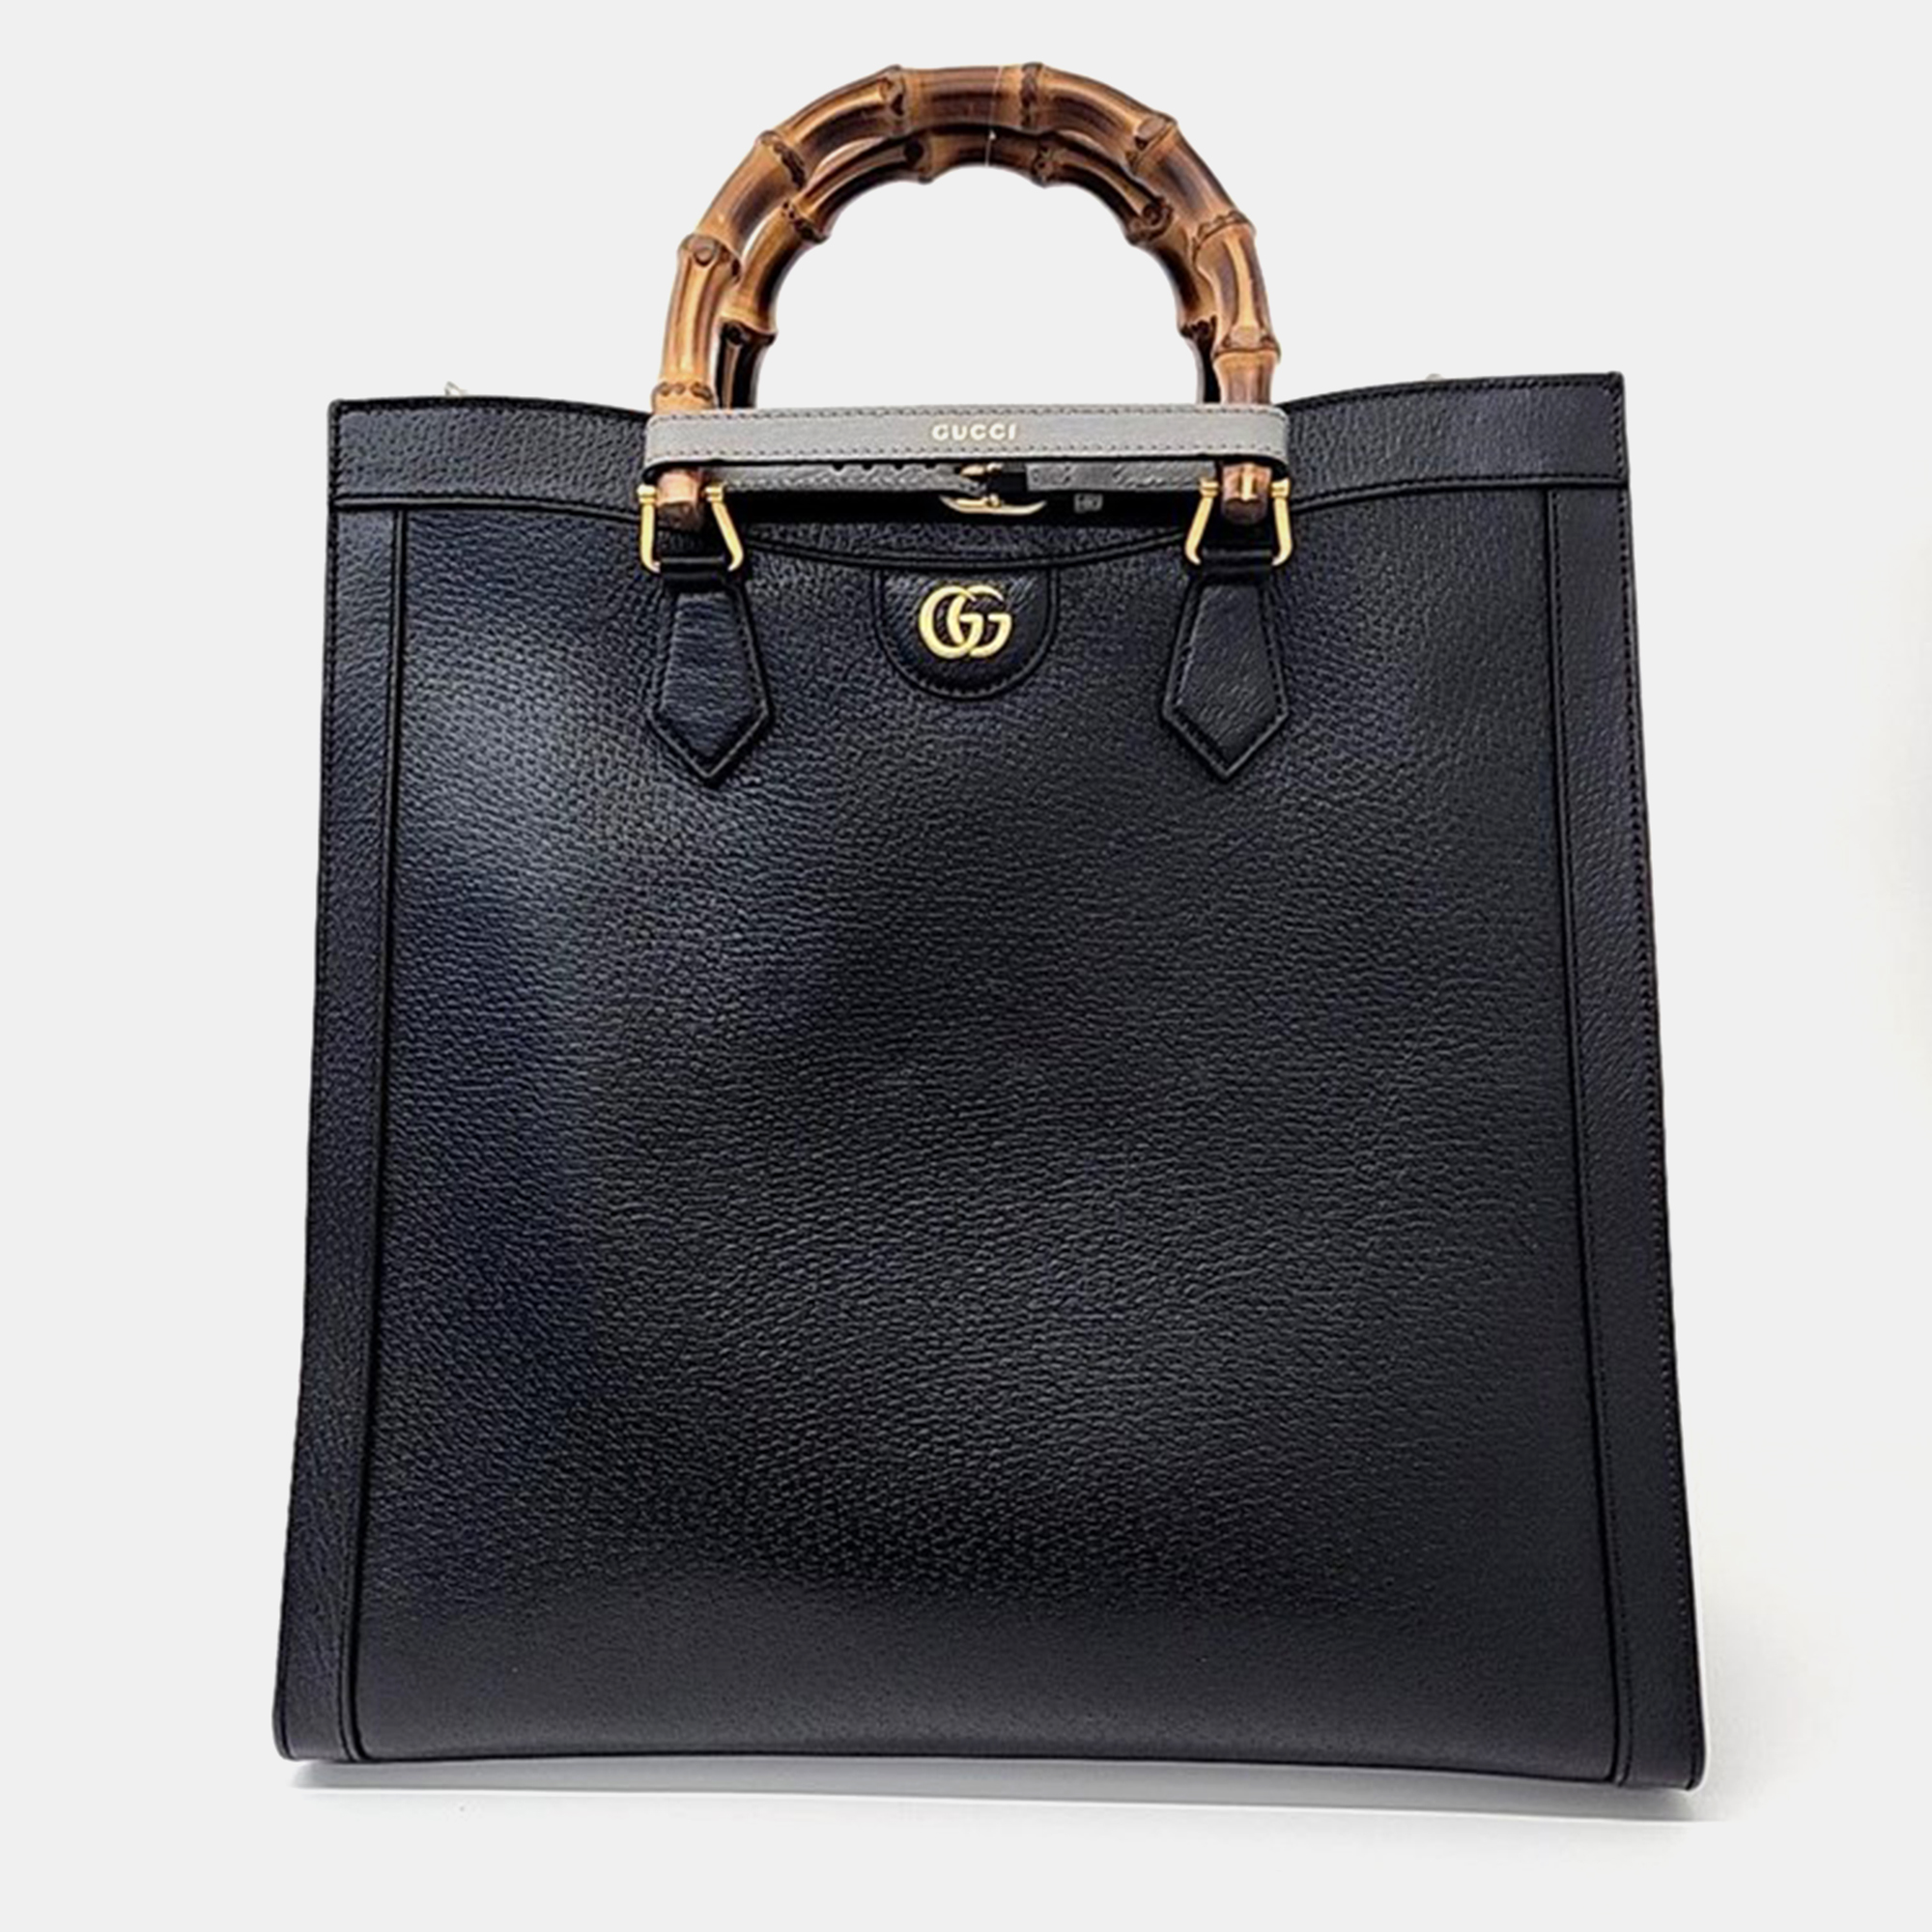 Gucci black leather large diana tote bag